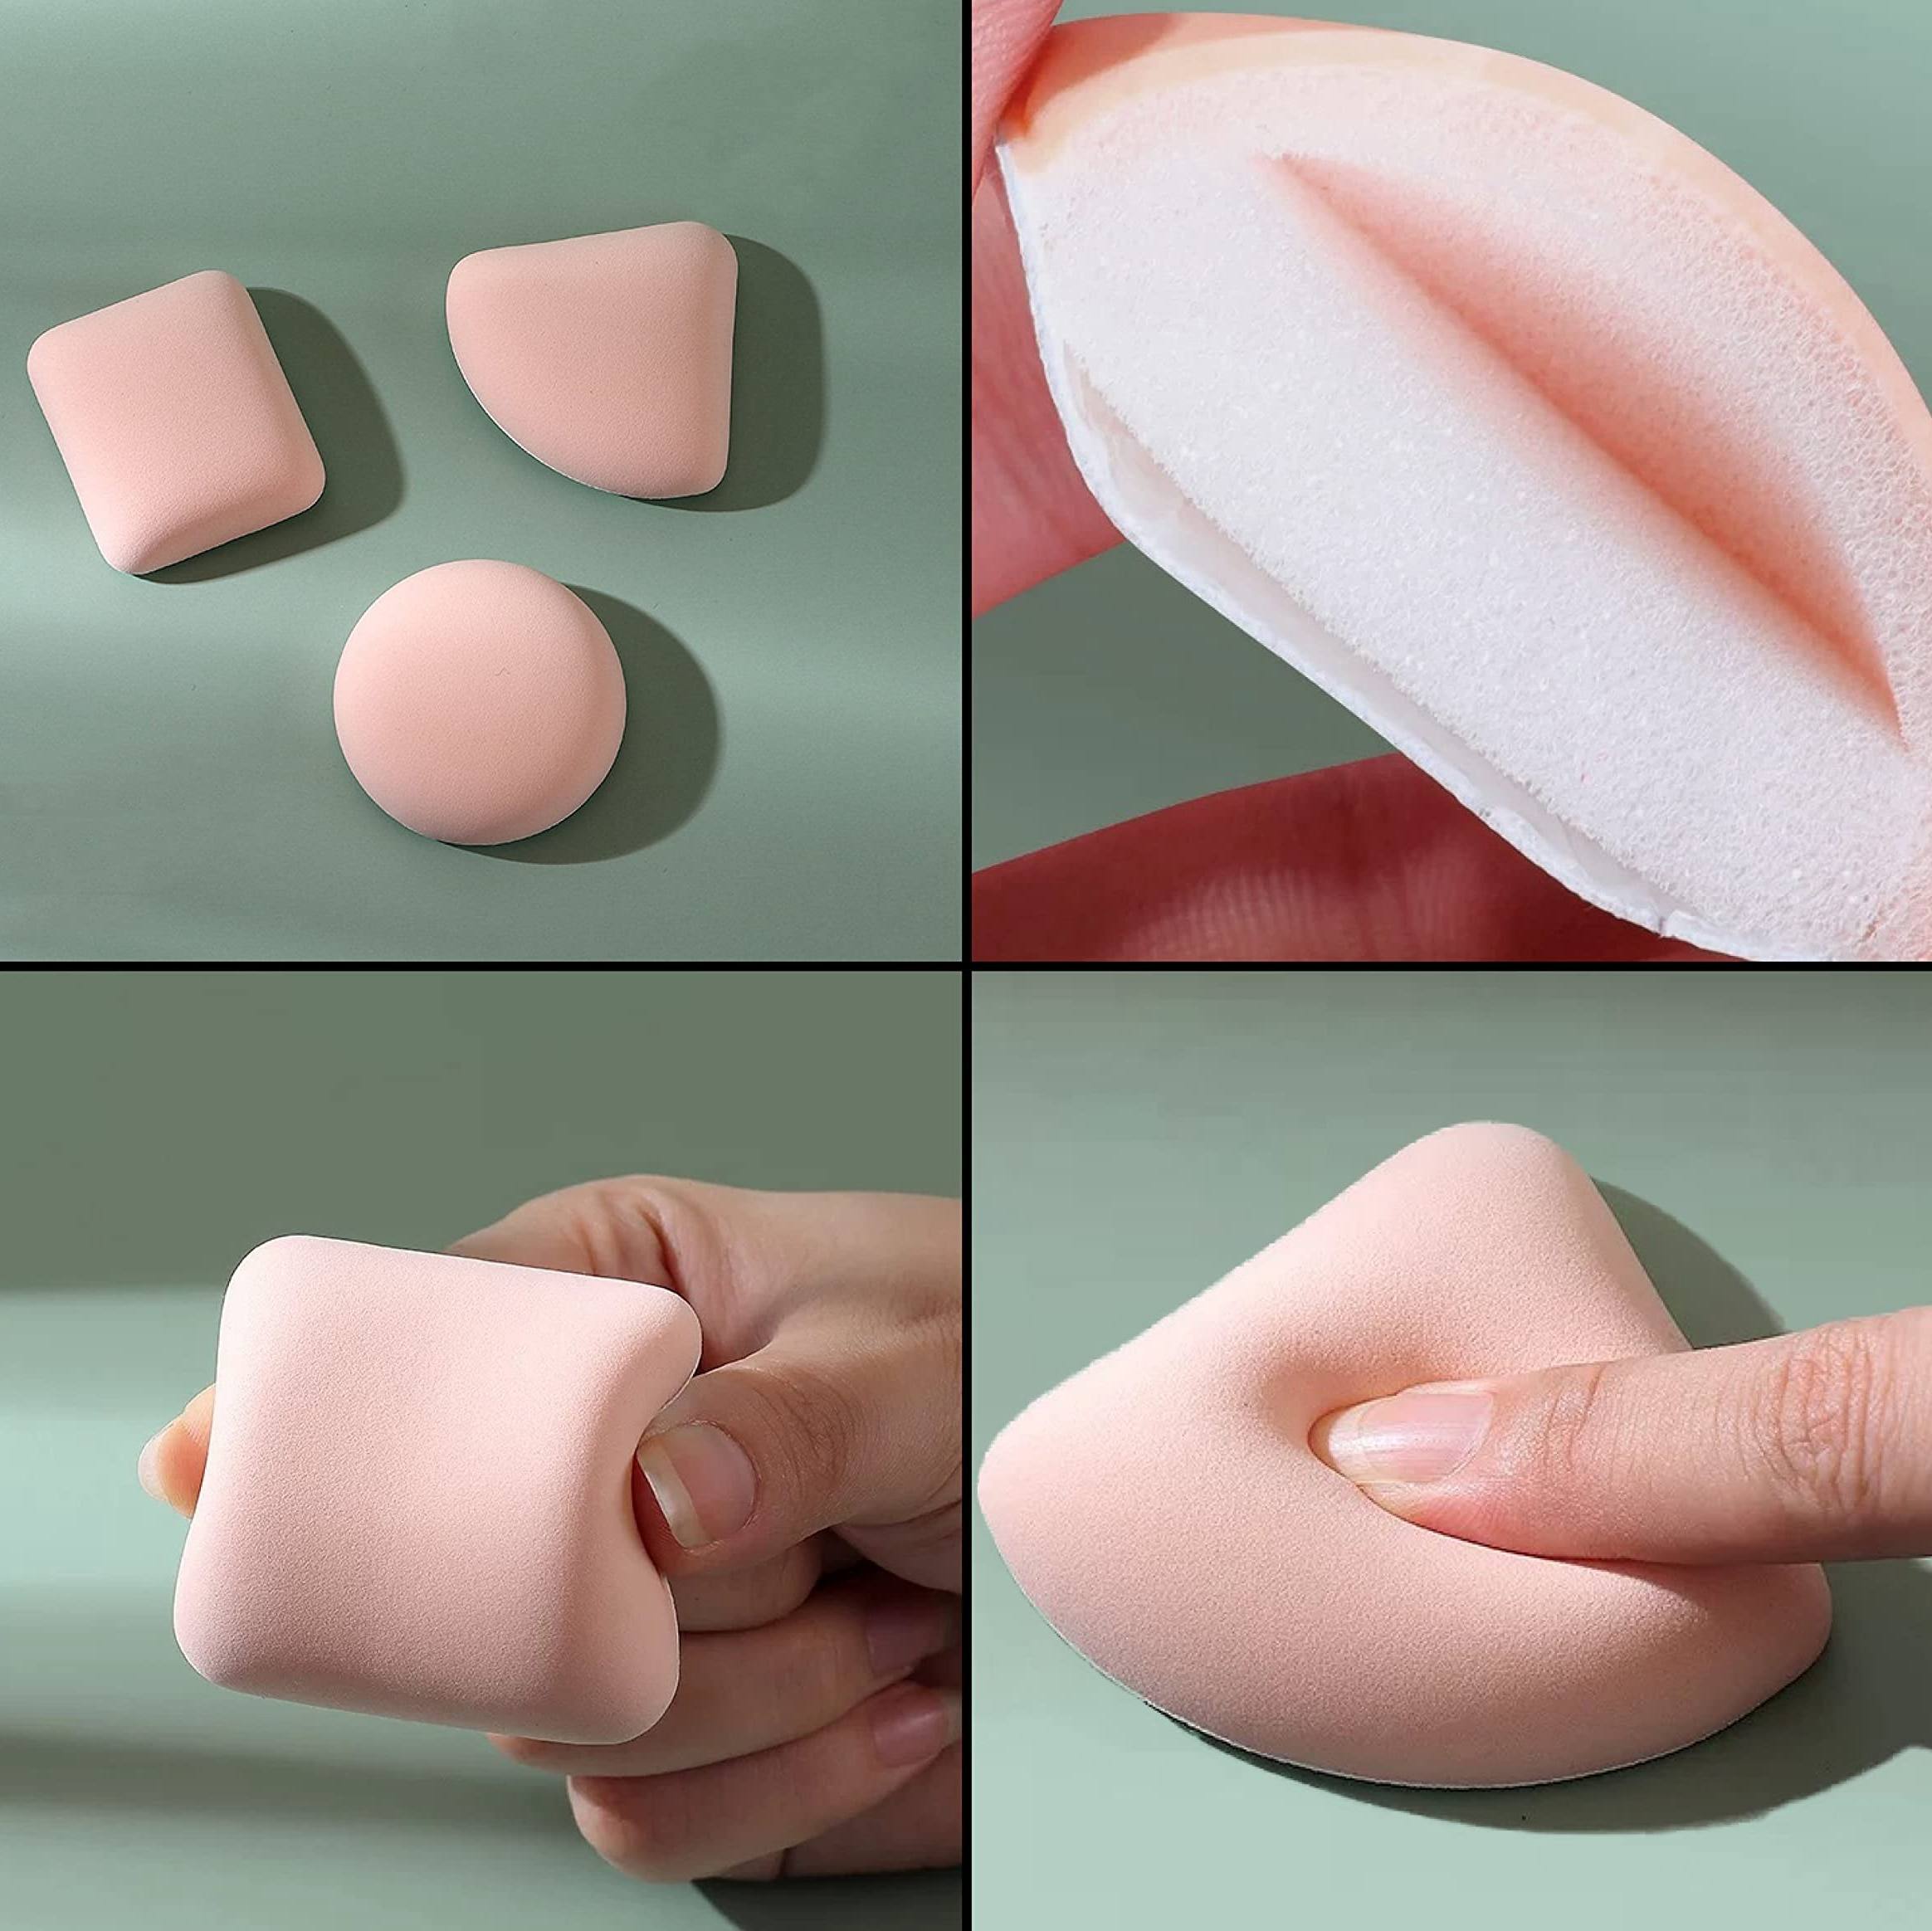 3 Pieces Dry Wet Usable Makeup Cosmetic Puff Sponge